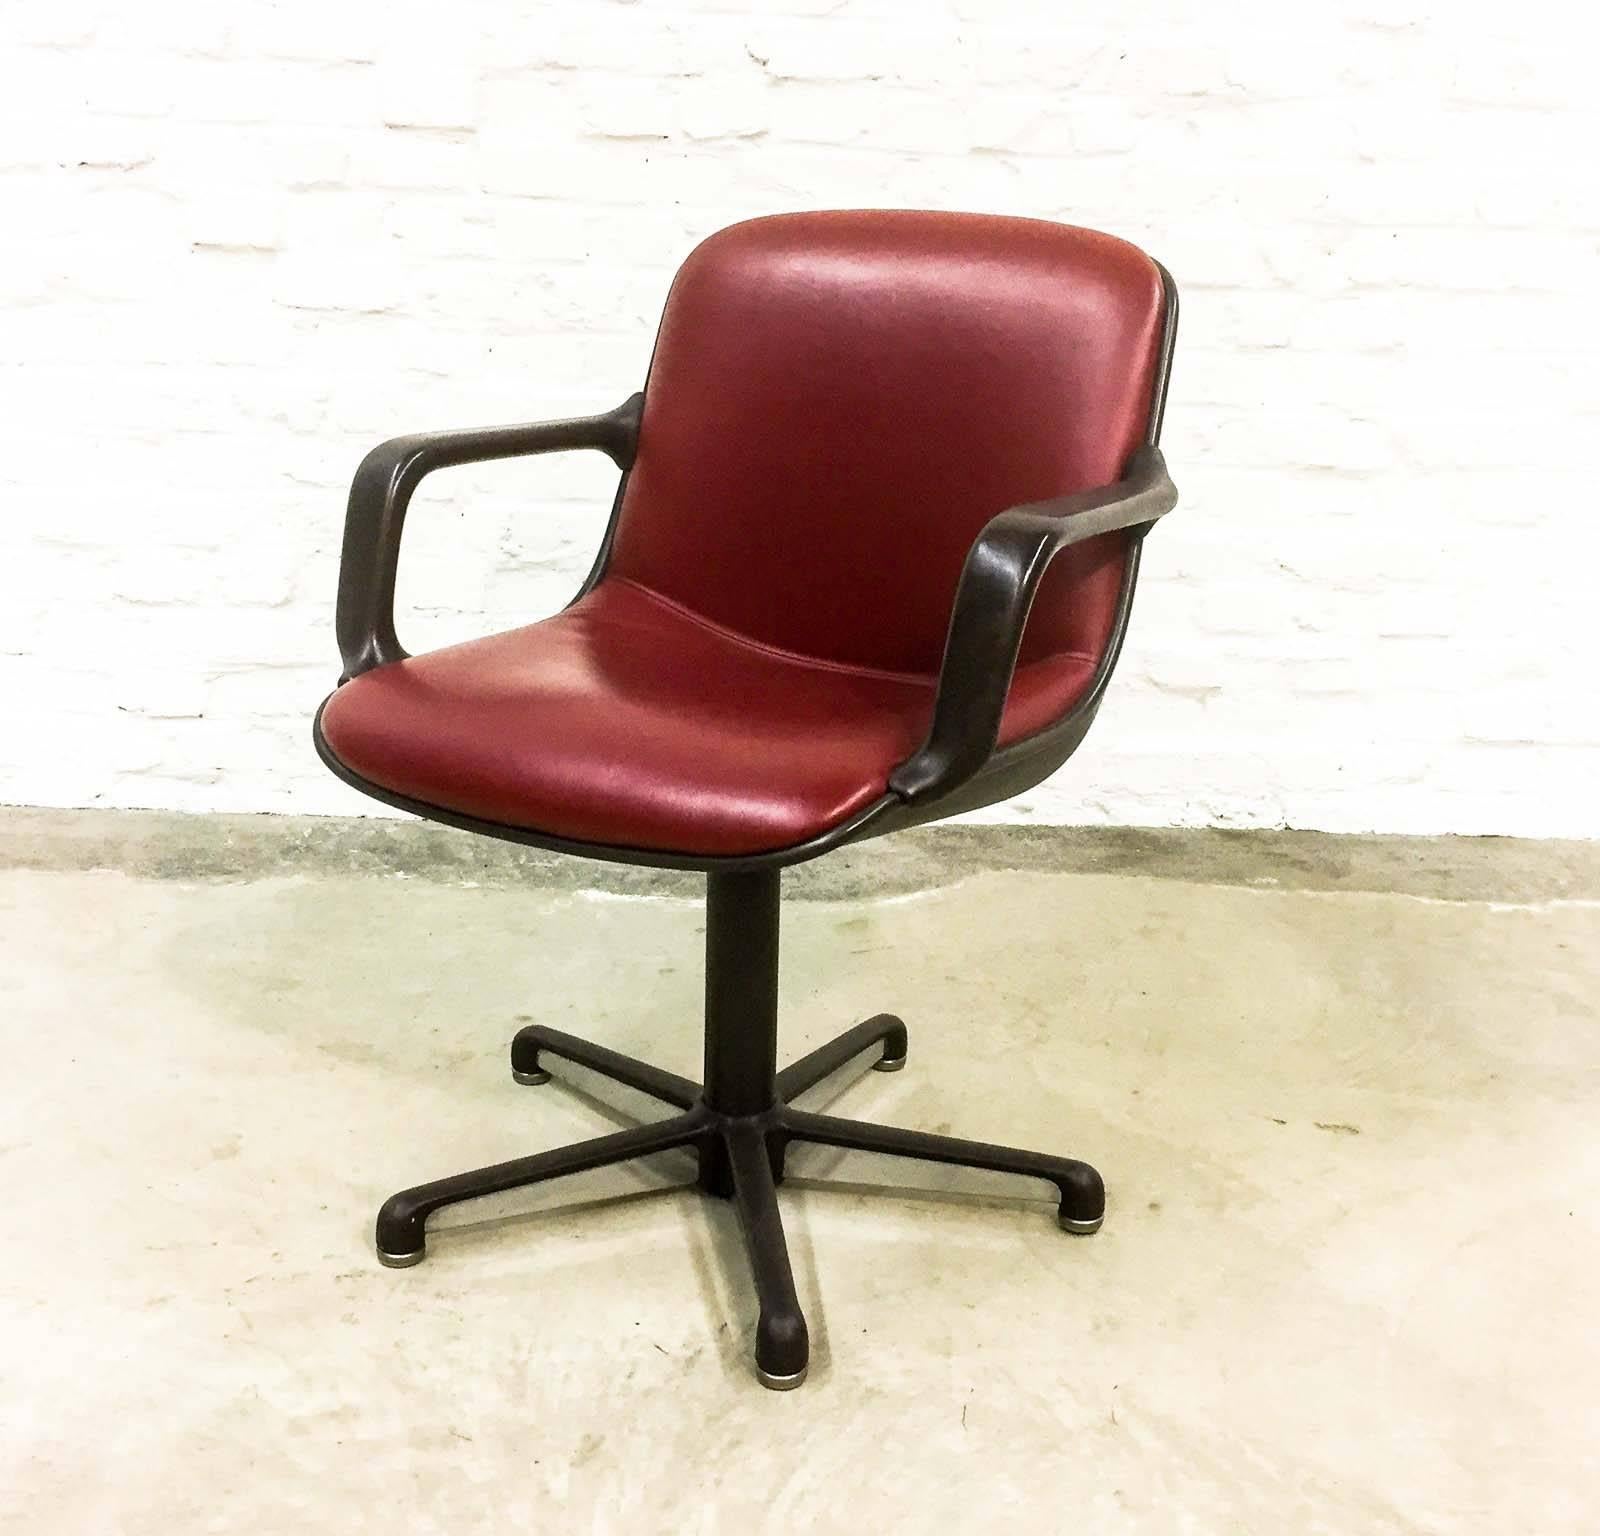 Italian Set of Eight Midcentury Burgundy Red Leather Executive Chairs by Comforto